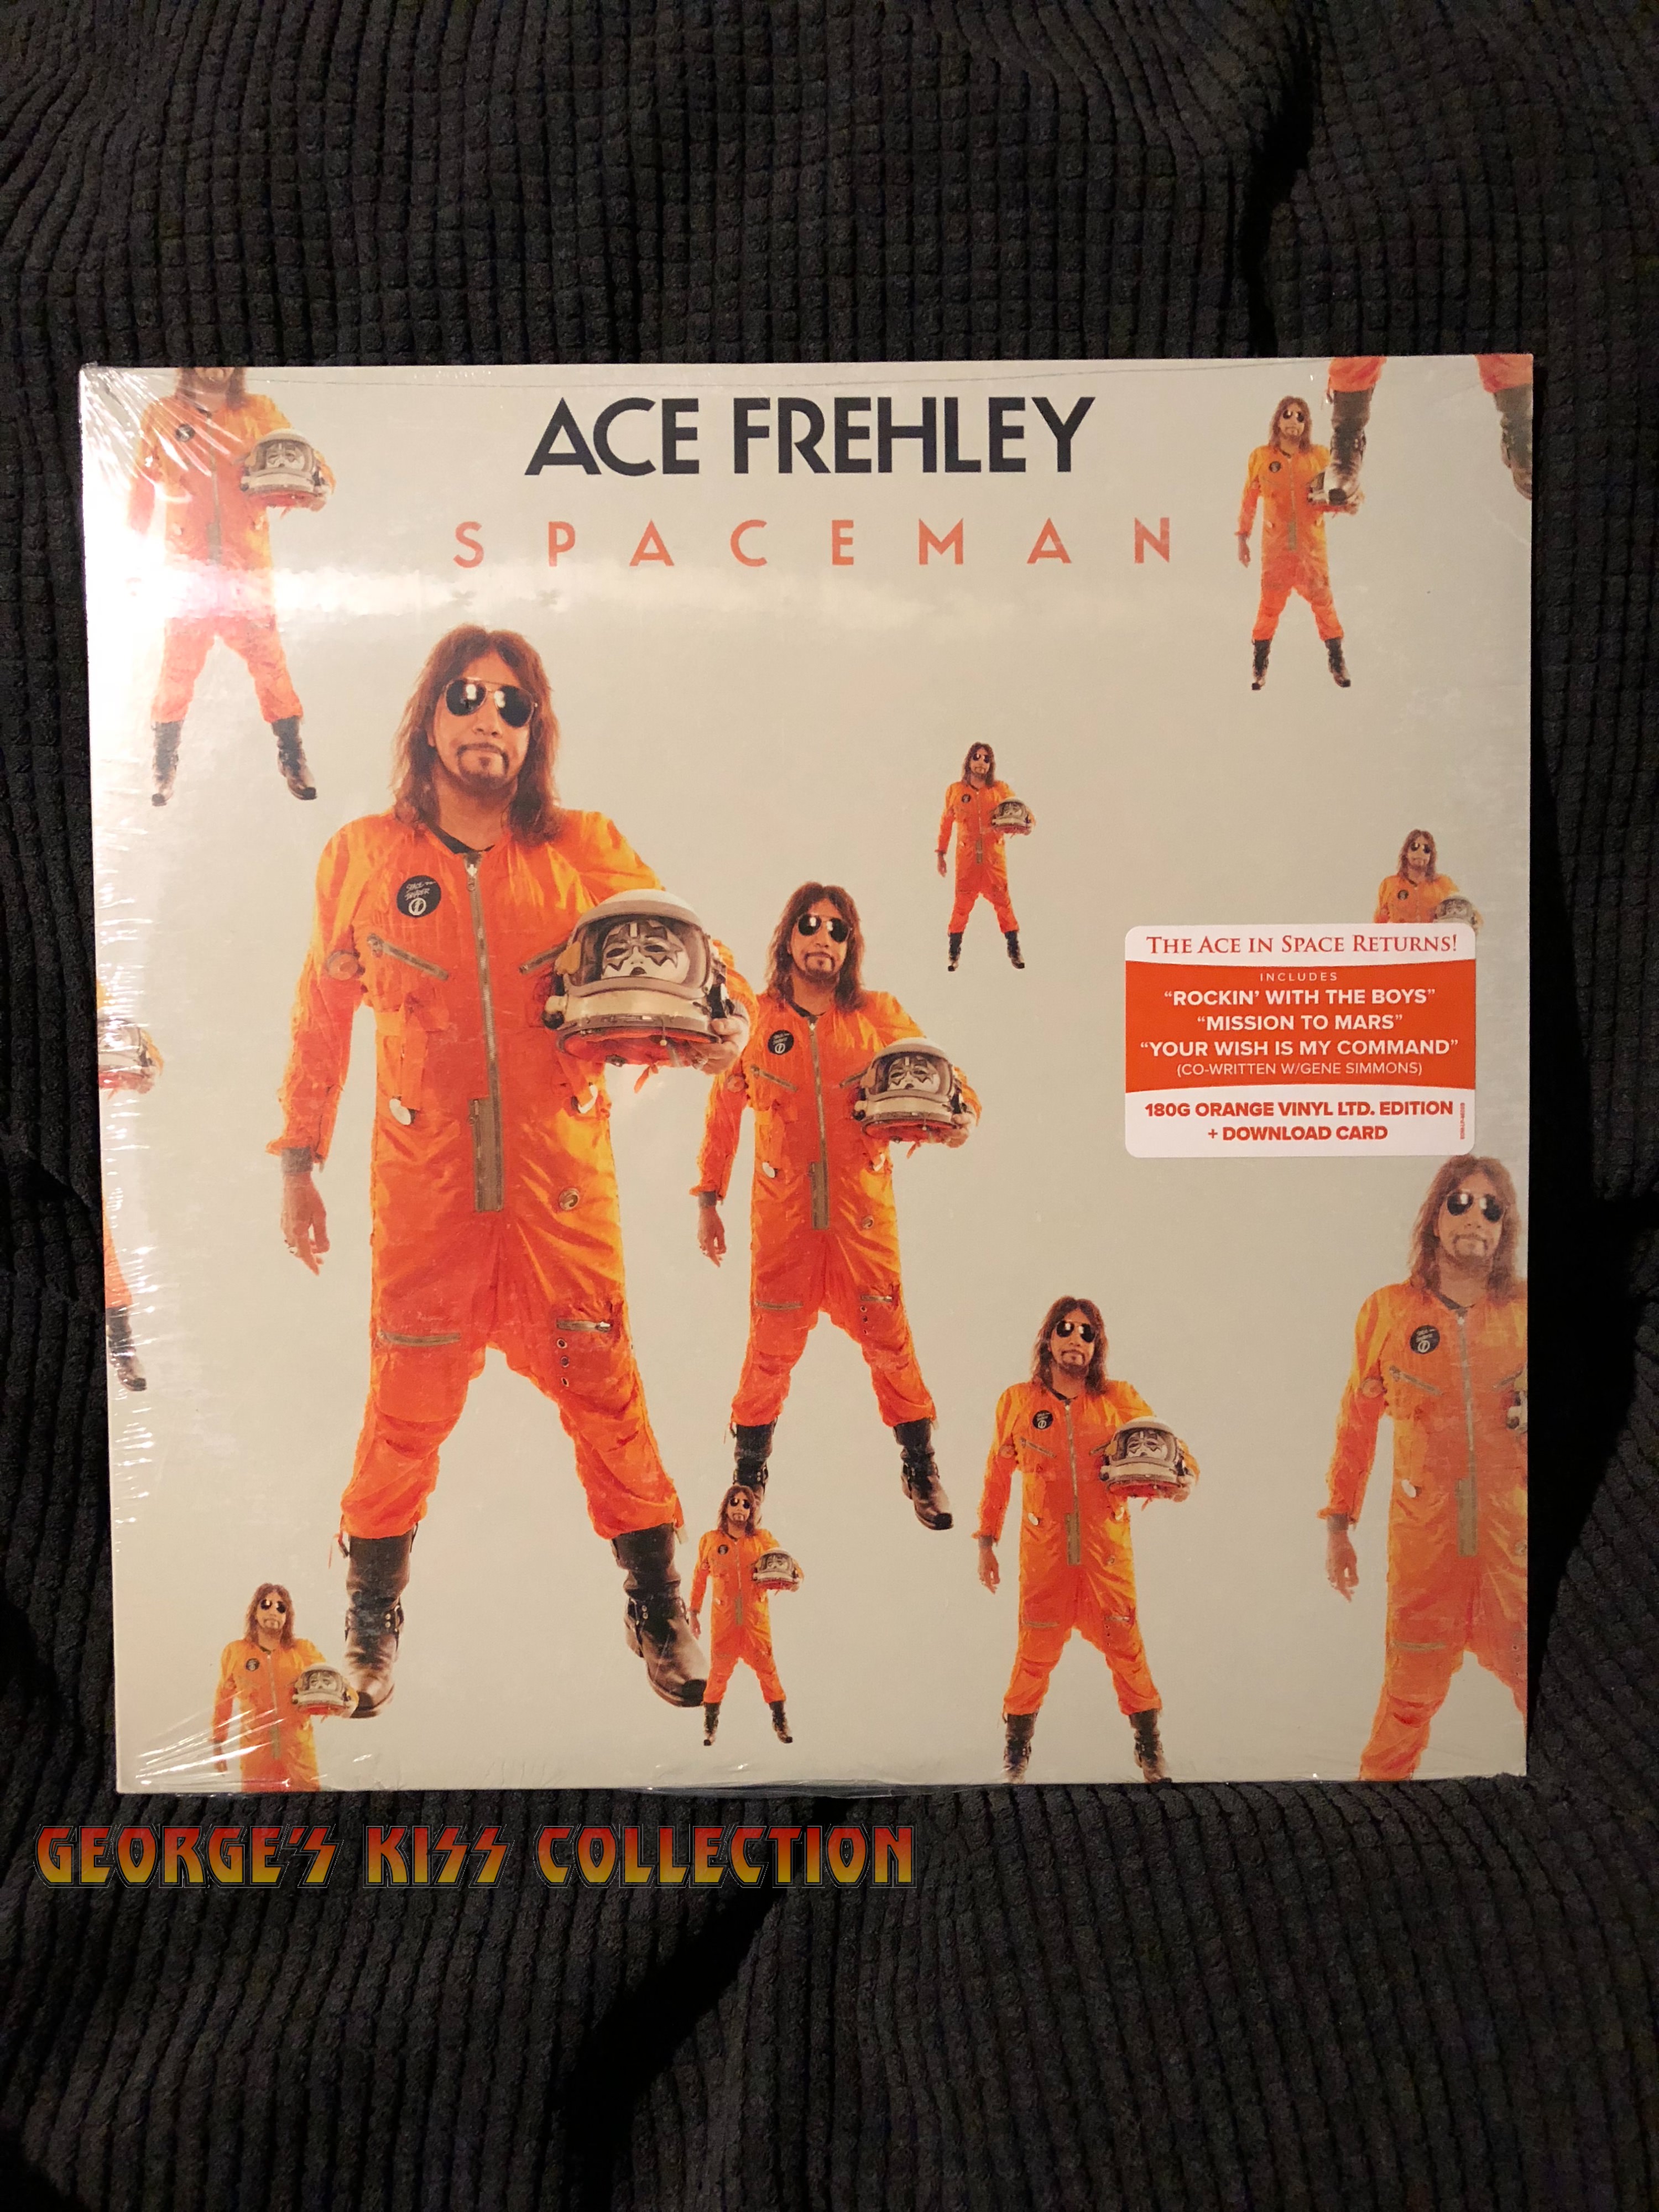 Ace Frehley - Spaceman - Edition Vinyl In - KISS Collection